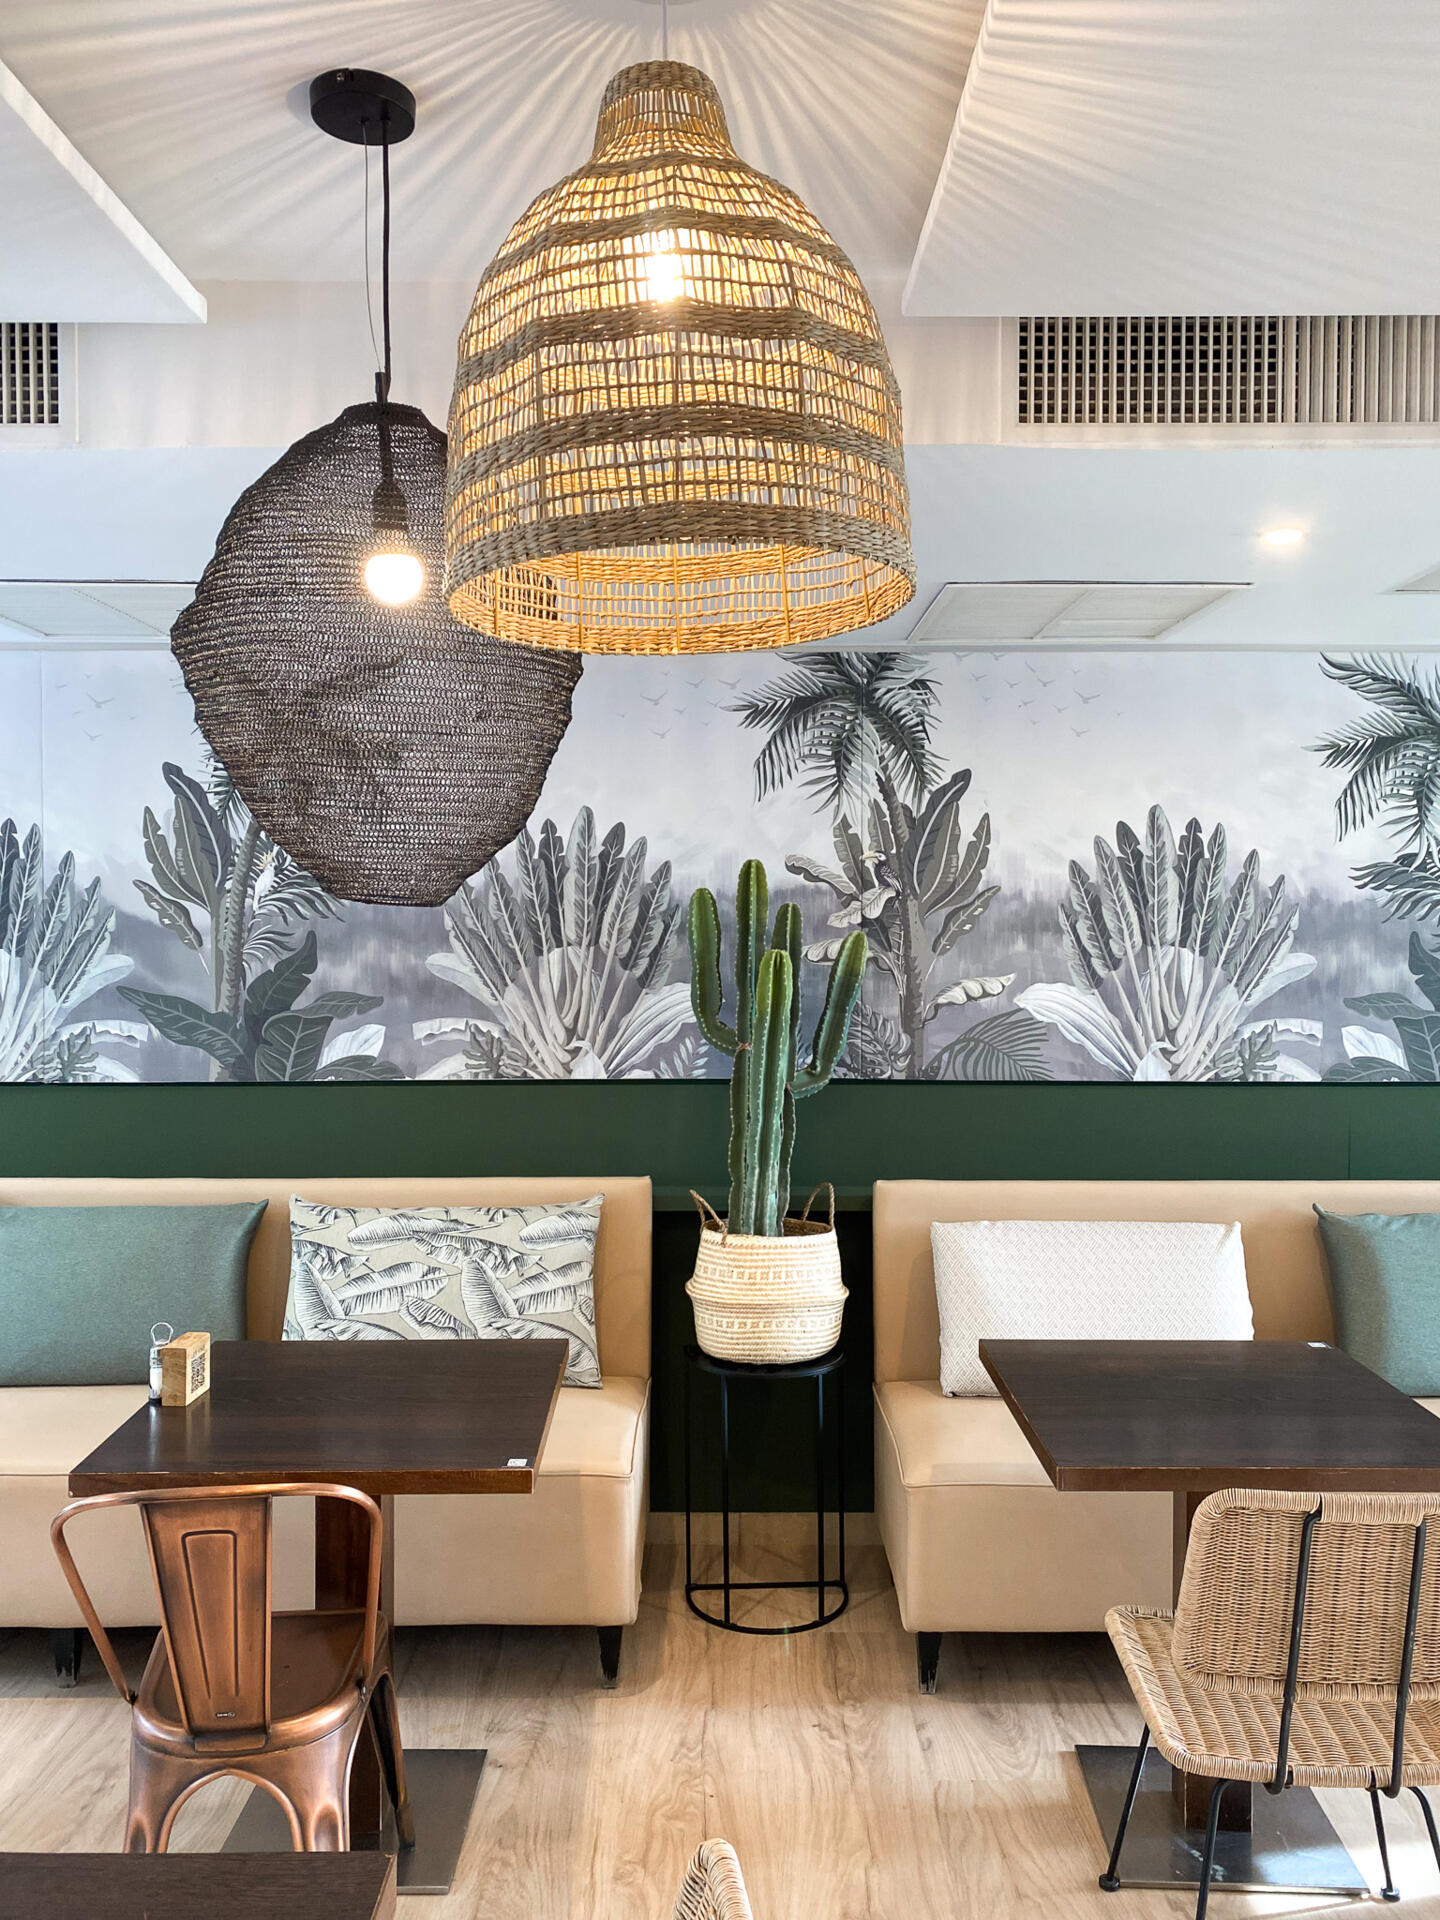 Interior decor of Bistrot City Montpellier Ovalie, featuring a rattan pendant light, a wall adorned with a tropical cactus mural in shades of grey, and a welcoming seating area with benches and printed cushions.